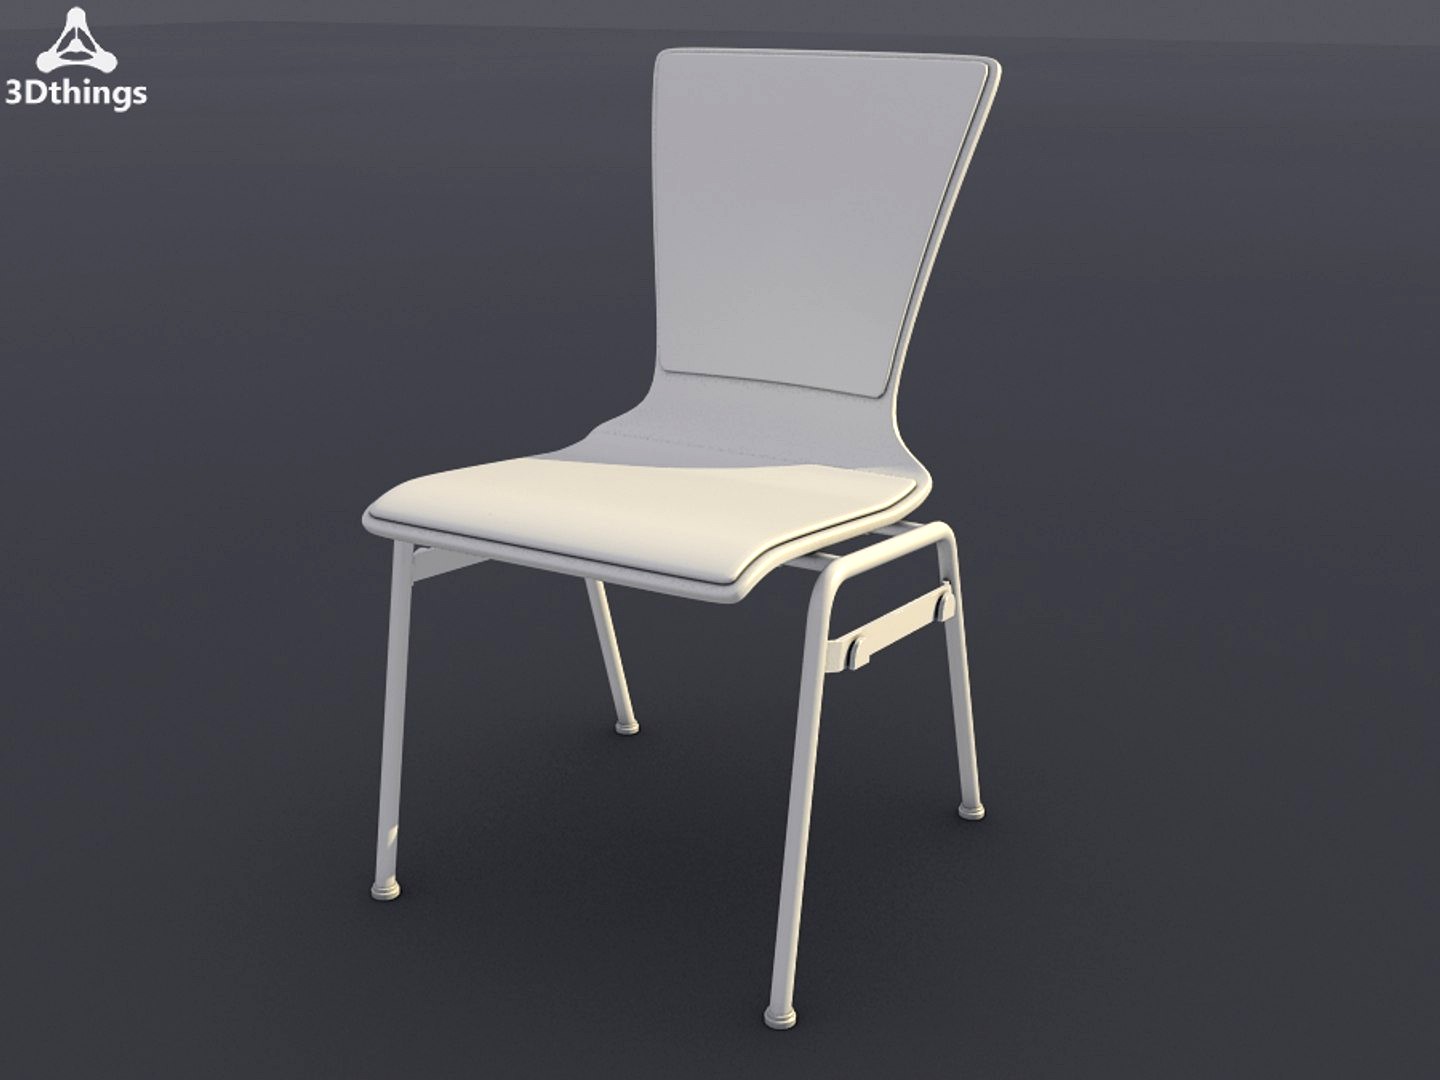 On stage 4-leg model with slimline backrest with seat and backrest cushion